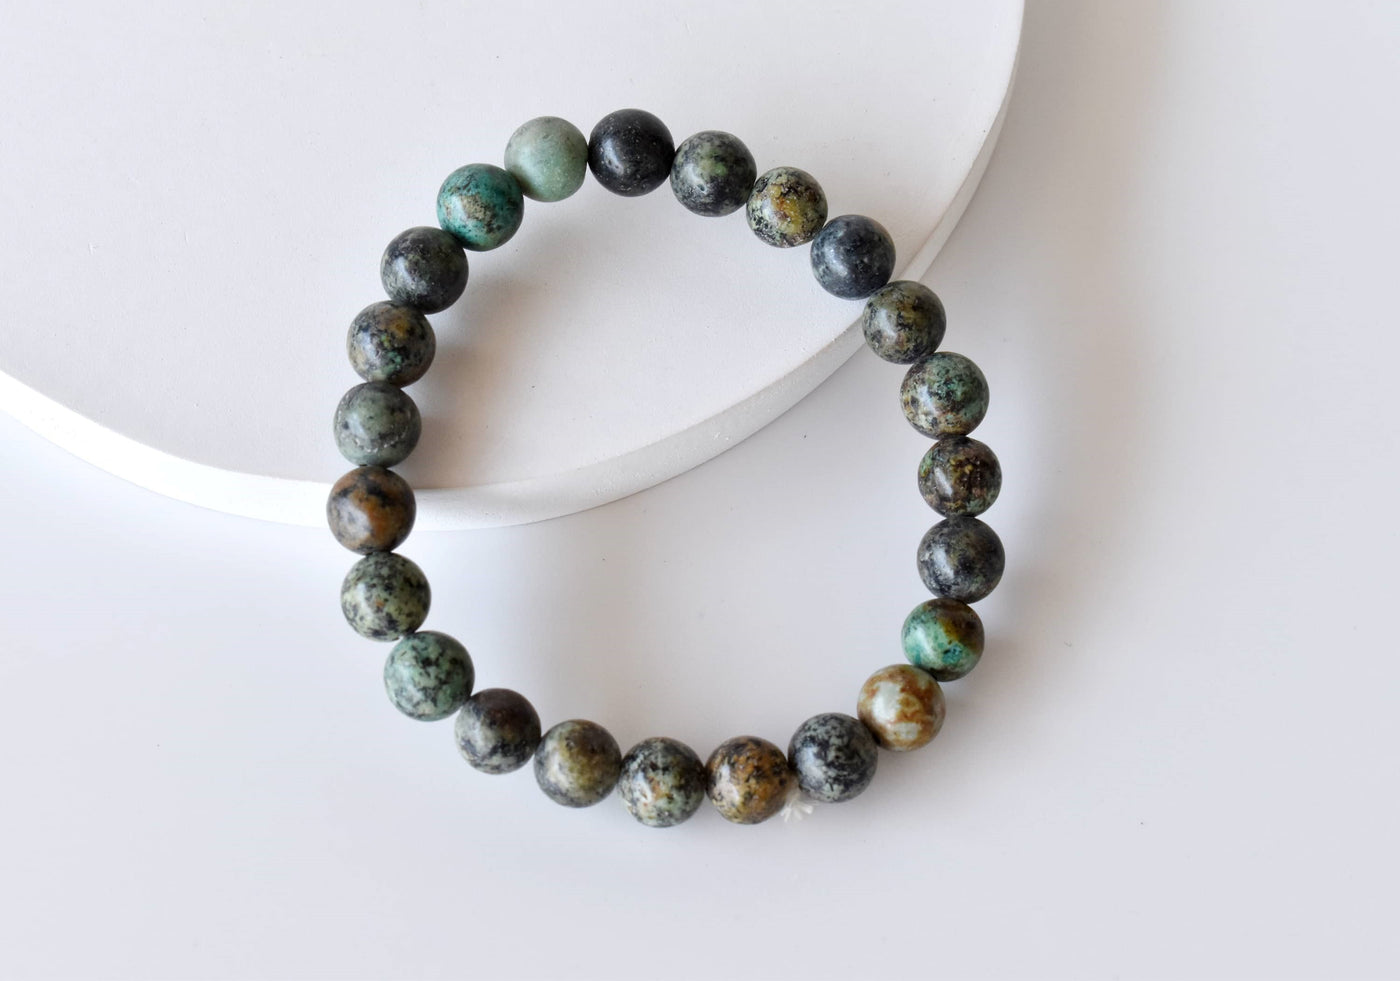 African Turquoise Bracelet (Transformation and Love)